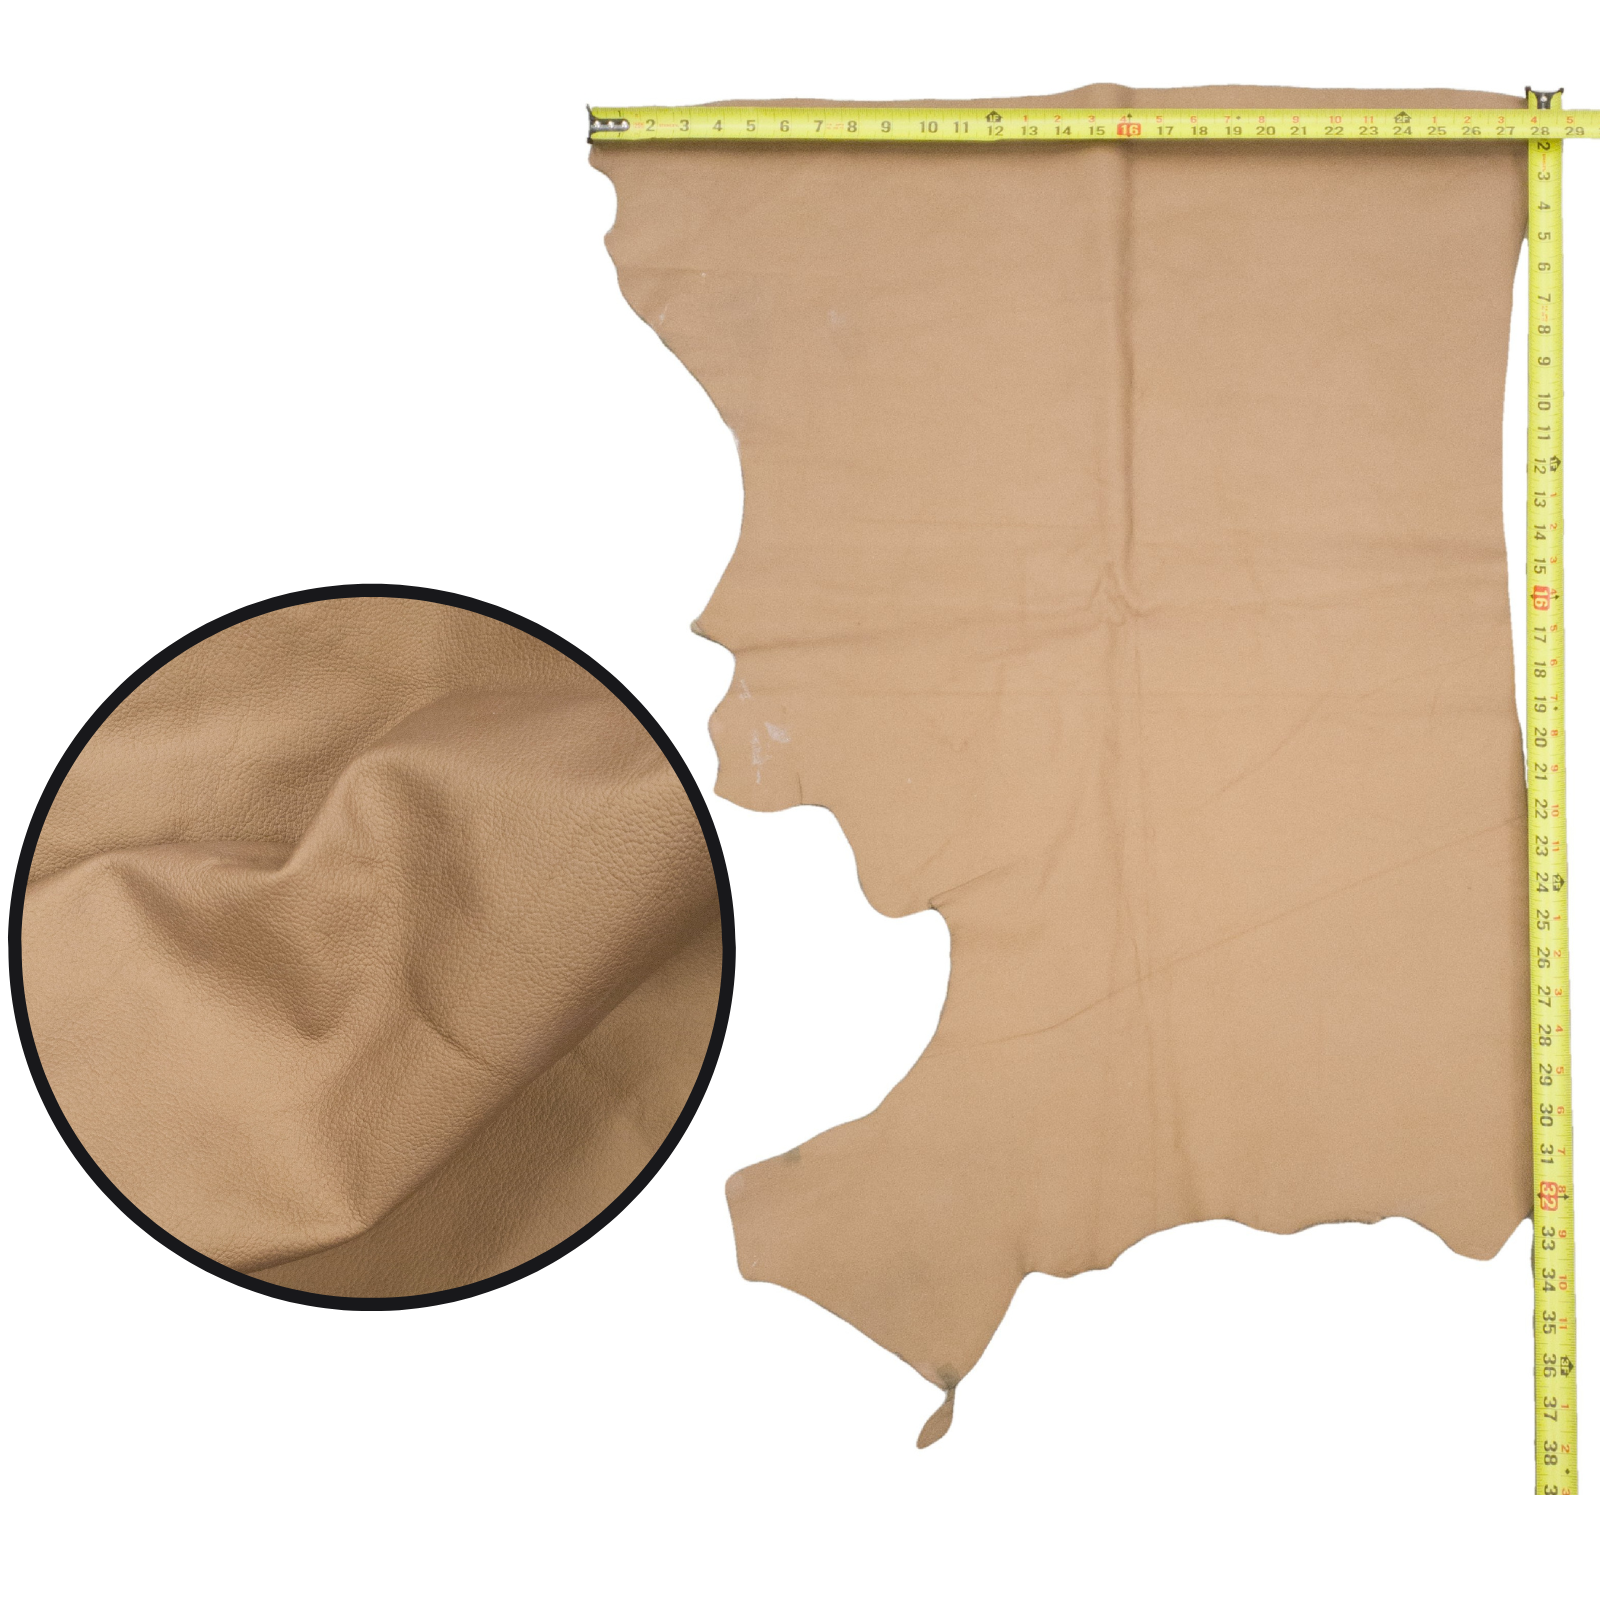 Light Browns, 4-20 Sq Ft Upholstery Cowhide Project Pieces, Pearled Tan / 4 / 1 | The Leather Guy